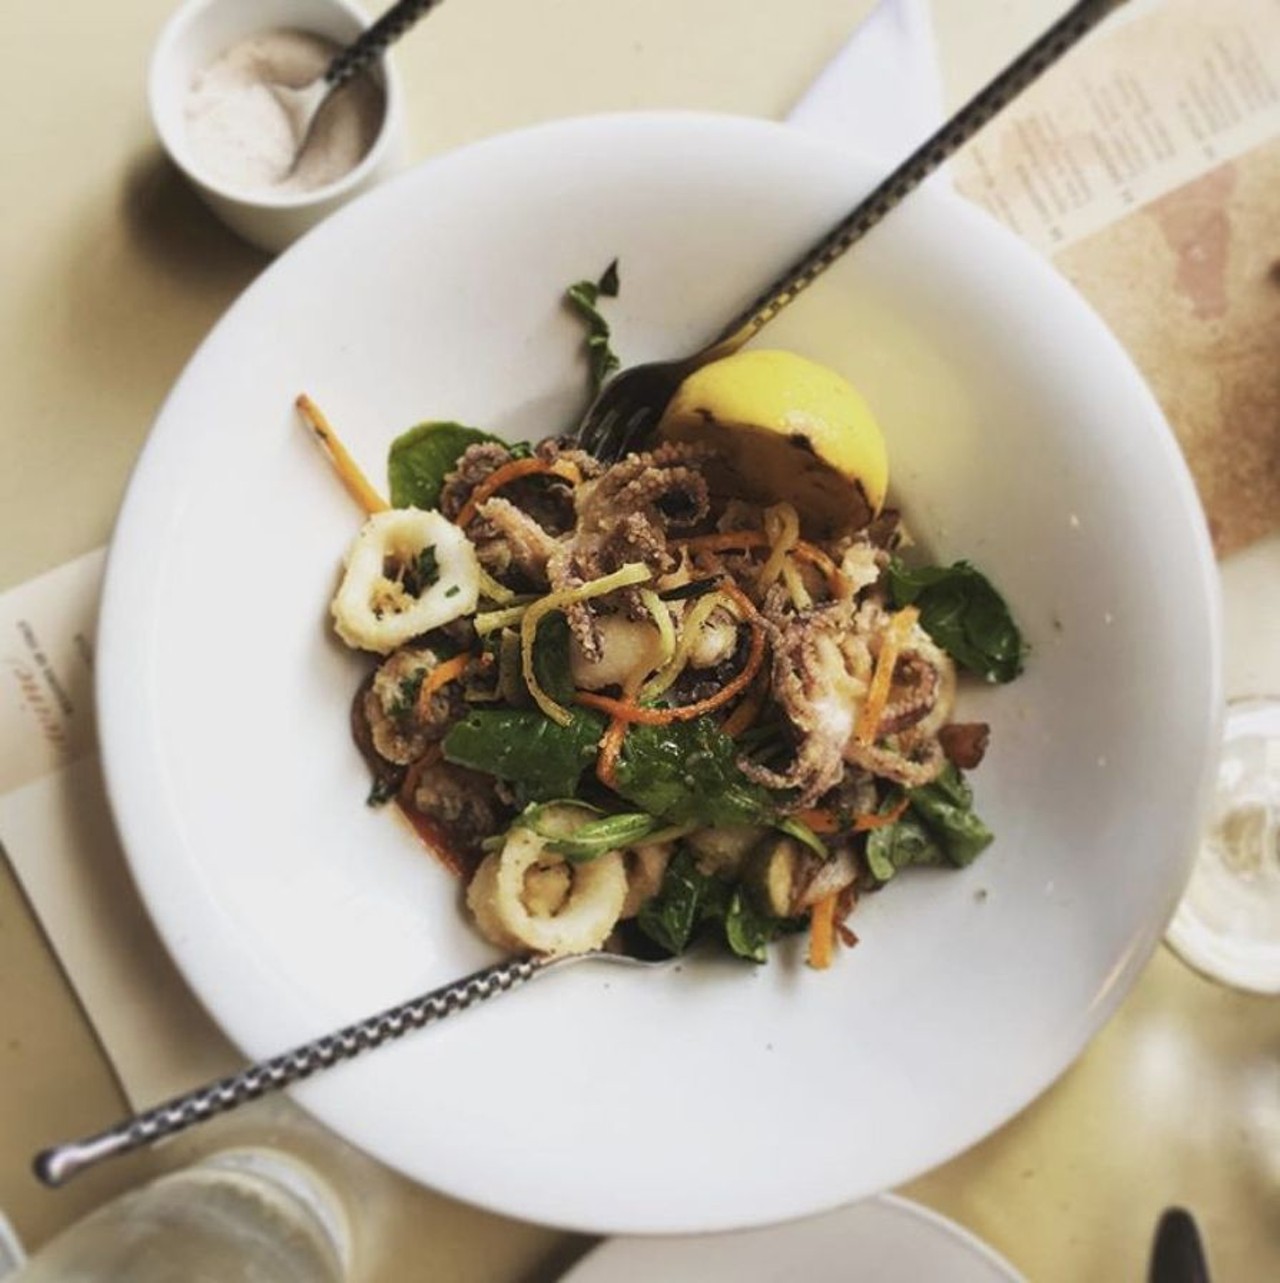  Good Nom Adventures
While this account features some eye-catching Cleveland dishes, it also regularly posts pictures from restaurants in Florida, California, and Texas, so you can think about how hungry you are while looking at dishes from across the country.
Photo via  goodnomadventures/Instagram